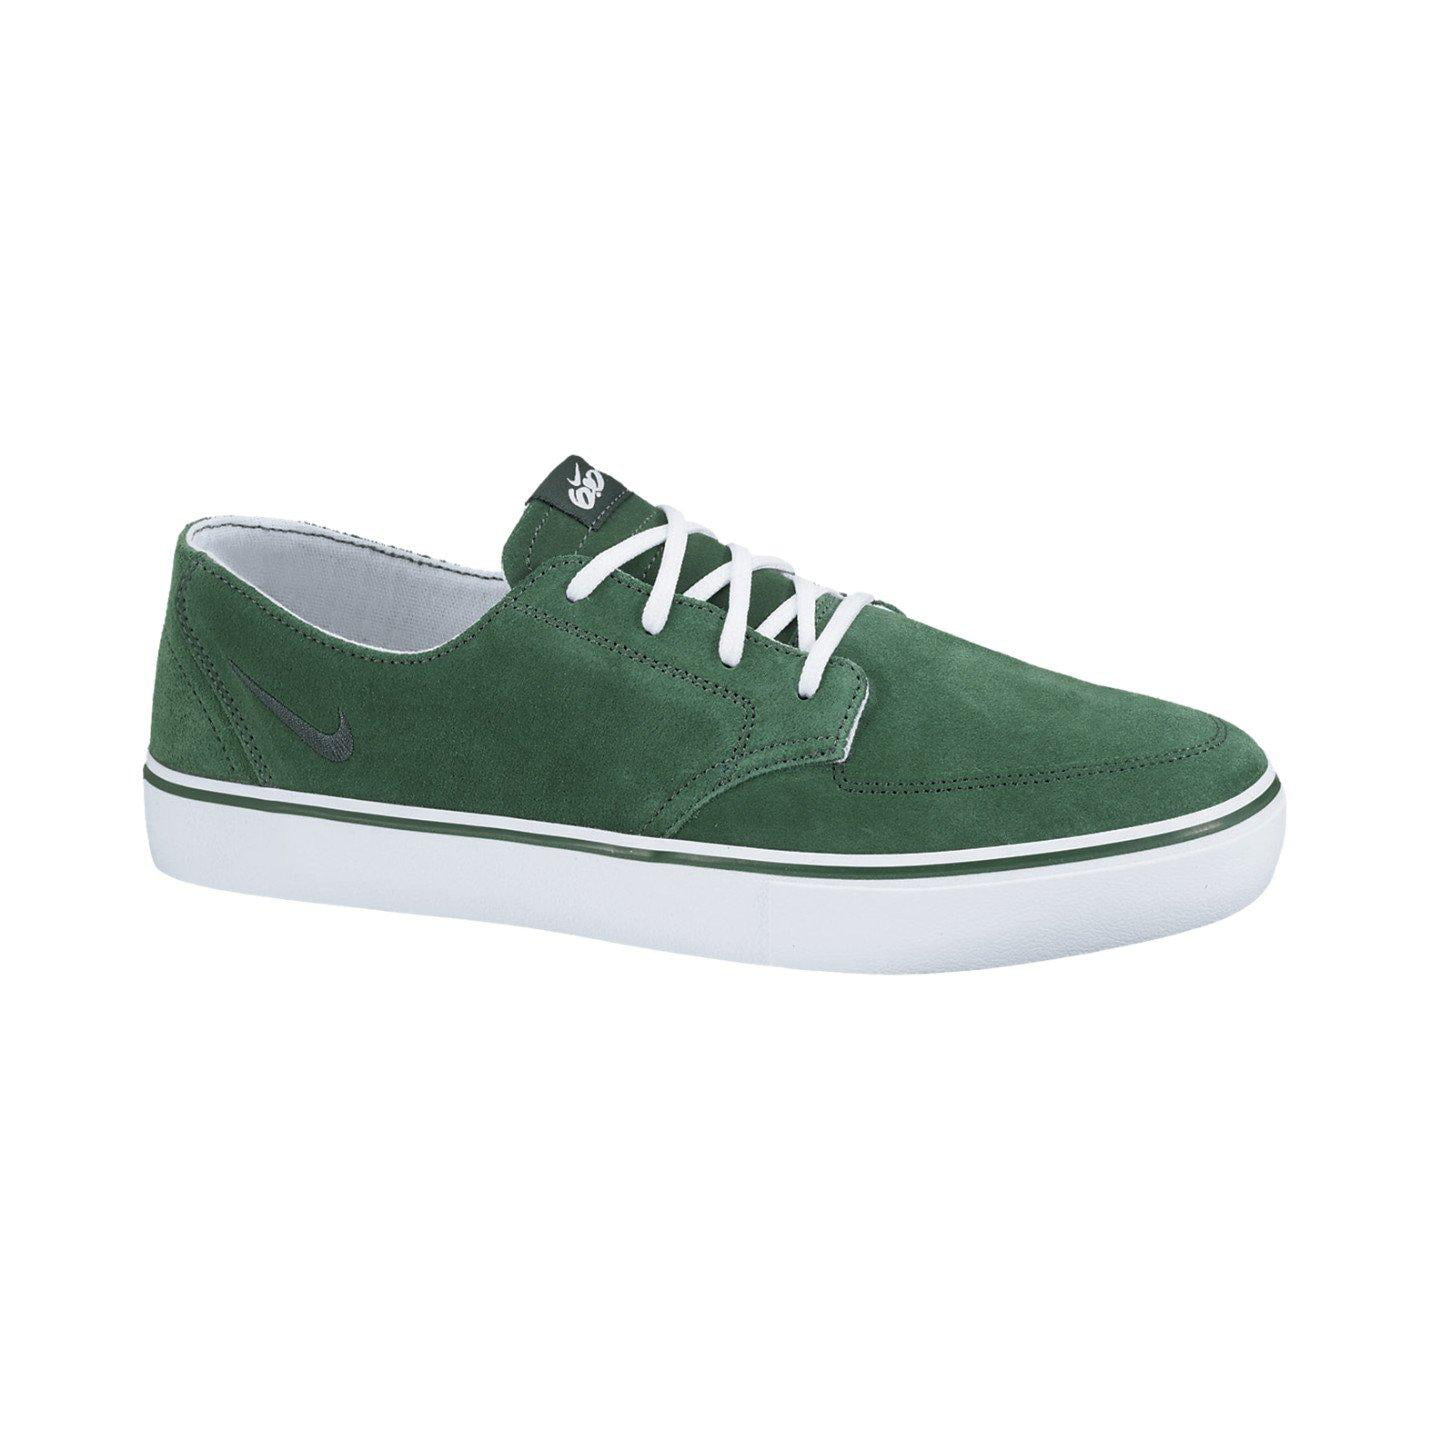 Interaction tent disinfectant Nike 6.0 Braata LR Green Suede White Mens 2012 New Casual Shoes 477650-331  - Walmart.com